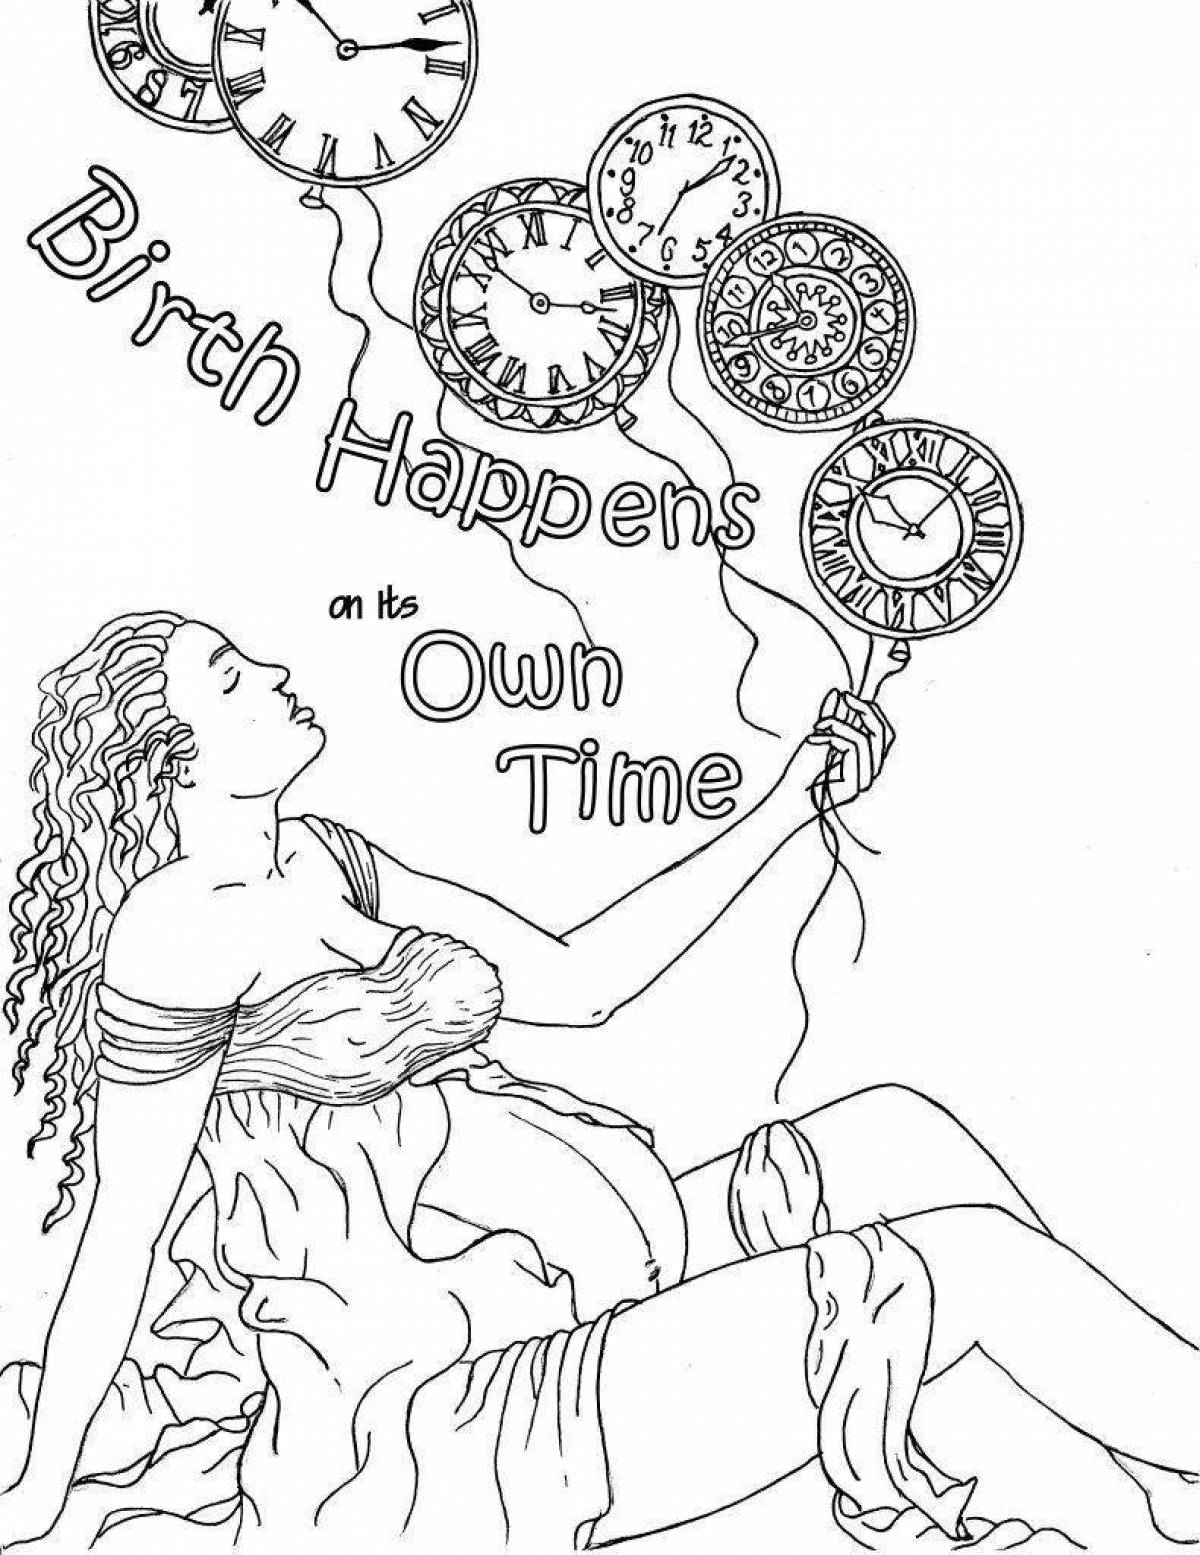 Touching pregnancy coloring page